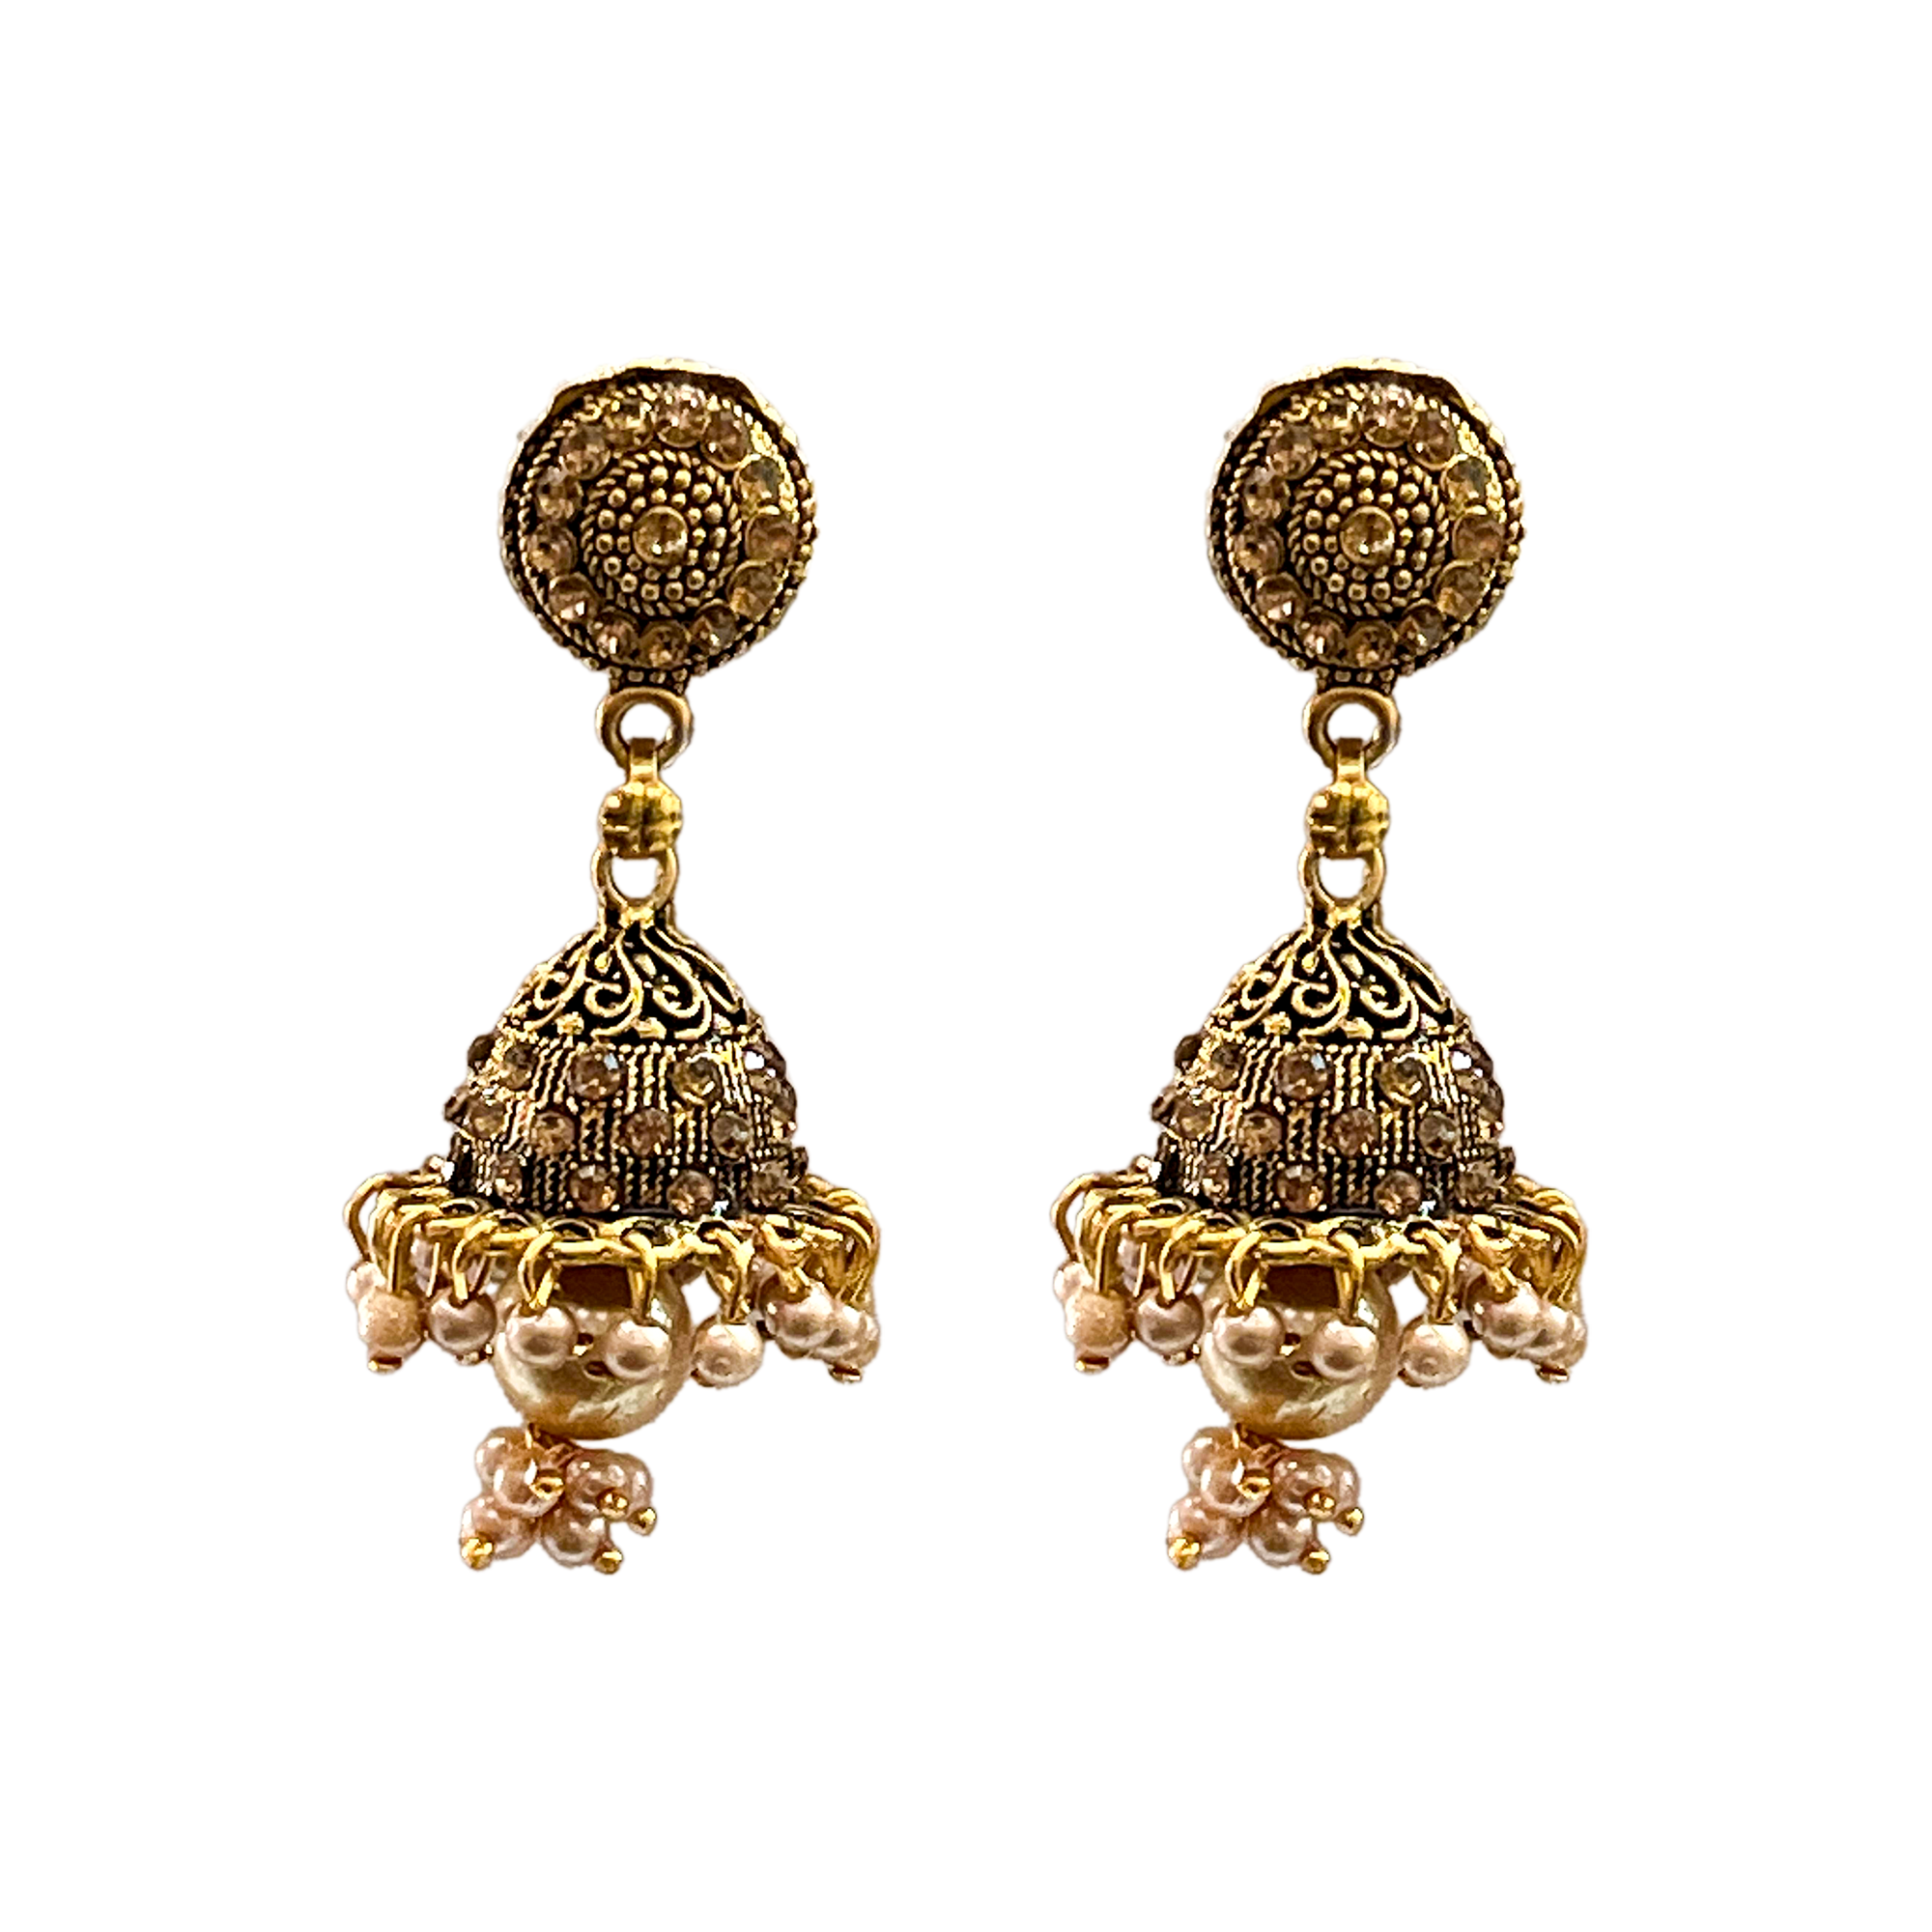 Traditional South Indian Gold Jhumka Earrings